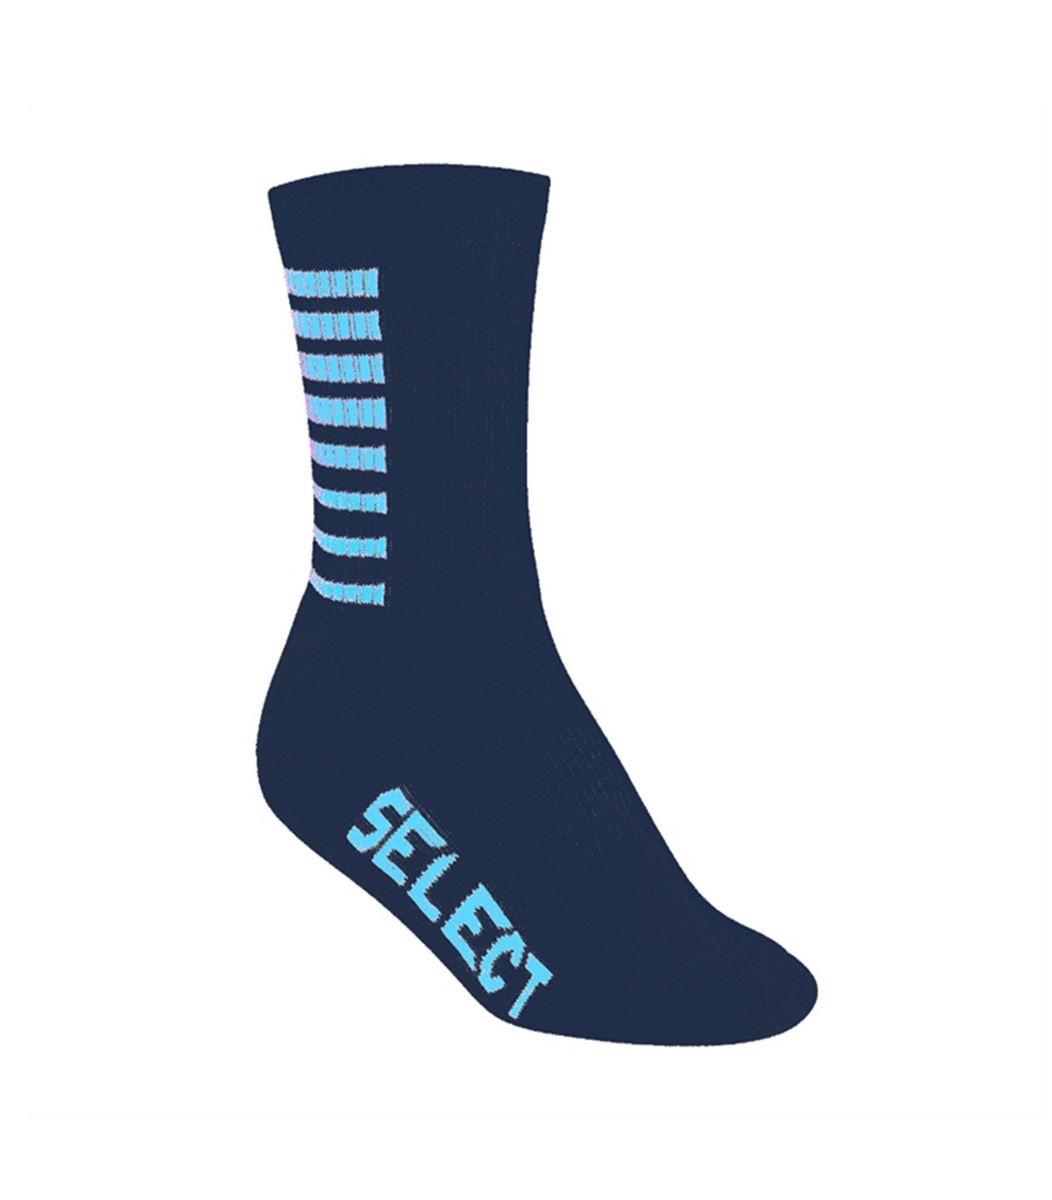 L651125-966_select_chaussettes_striped_navy_turquoise_sgequipement_sg_equipement